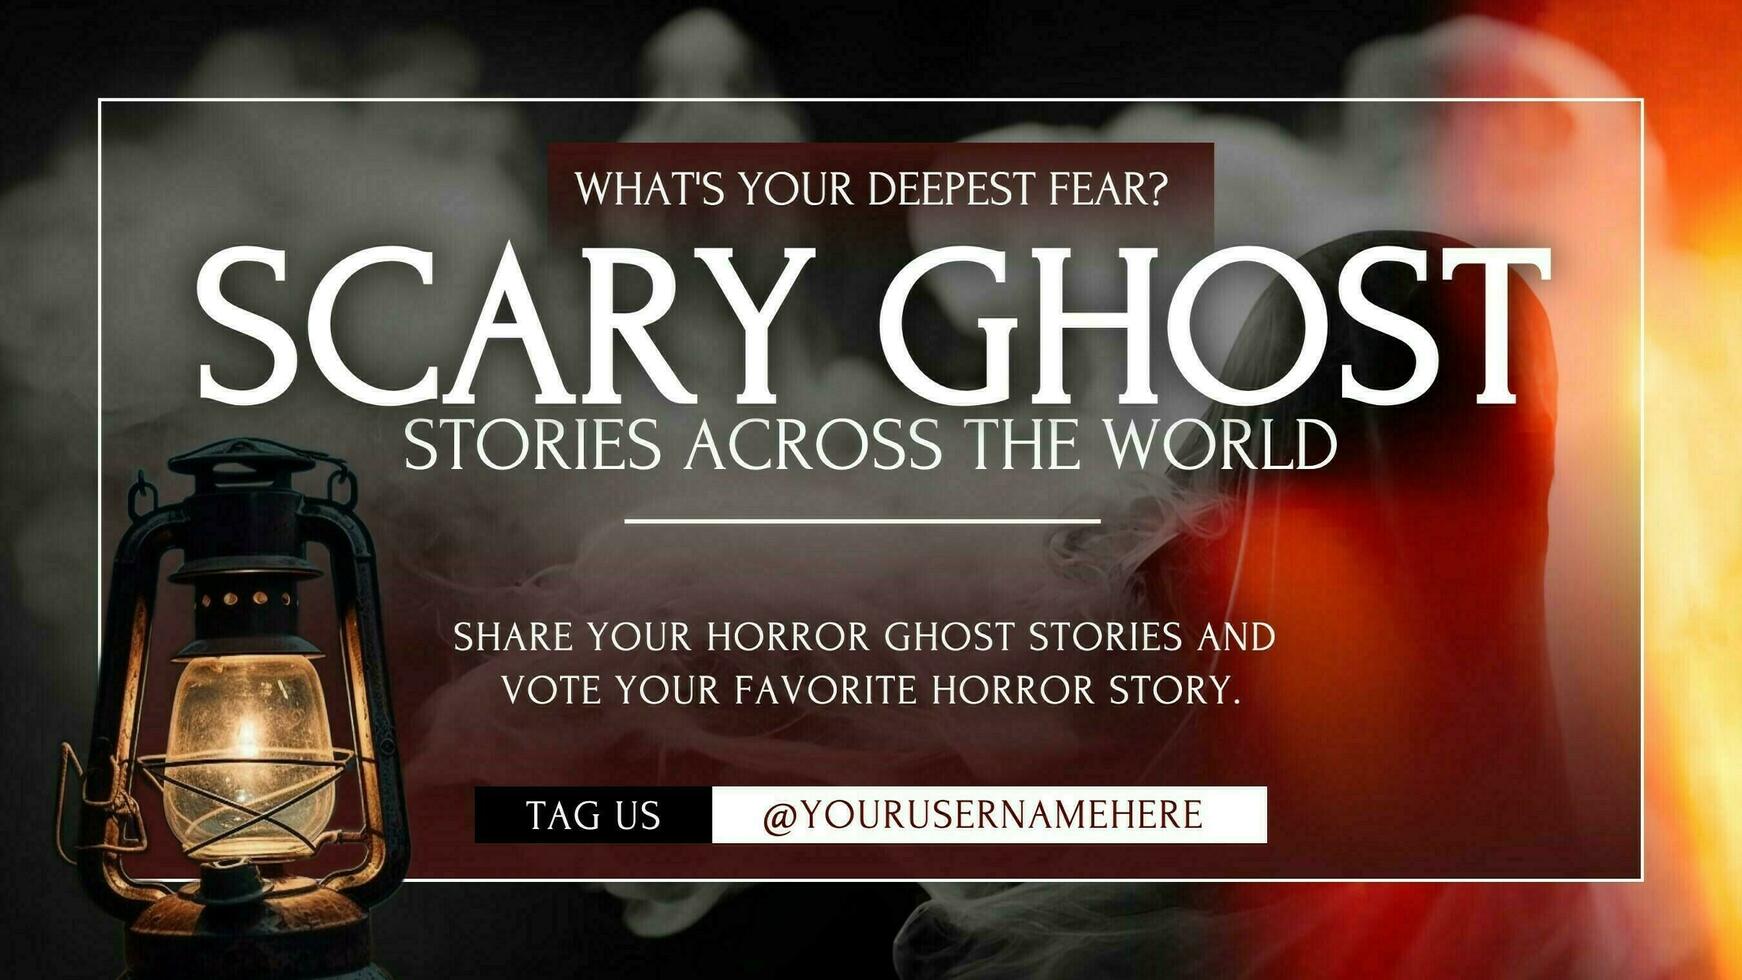 Red Flare Lantern Halloween for Scary Ghost Stories Template Twitter Post